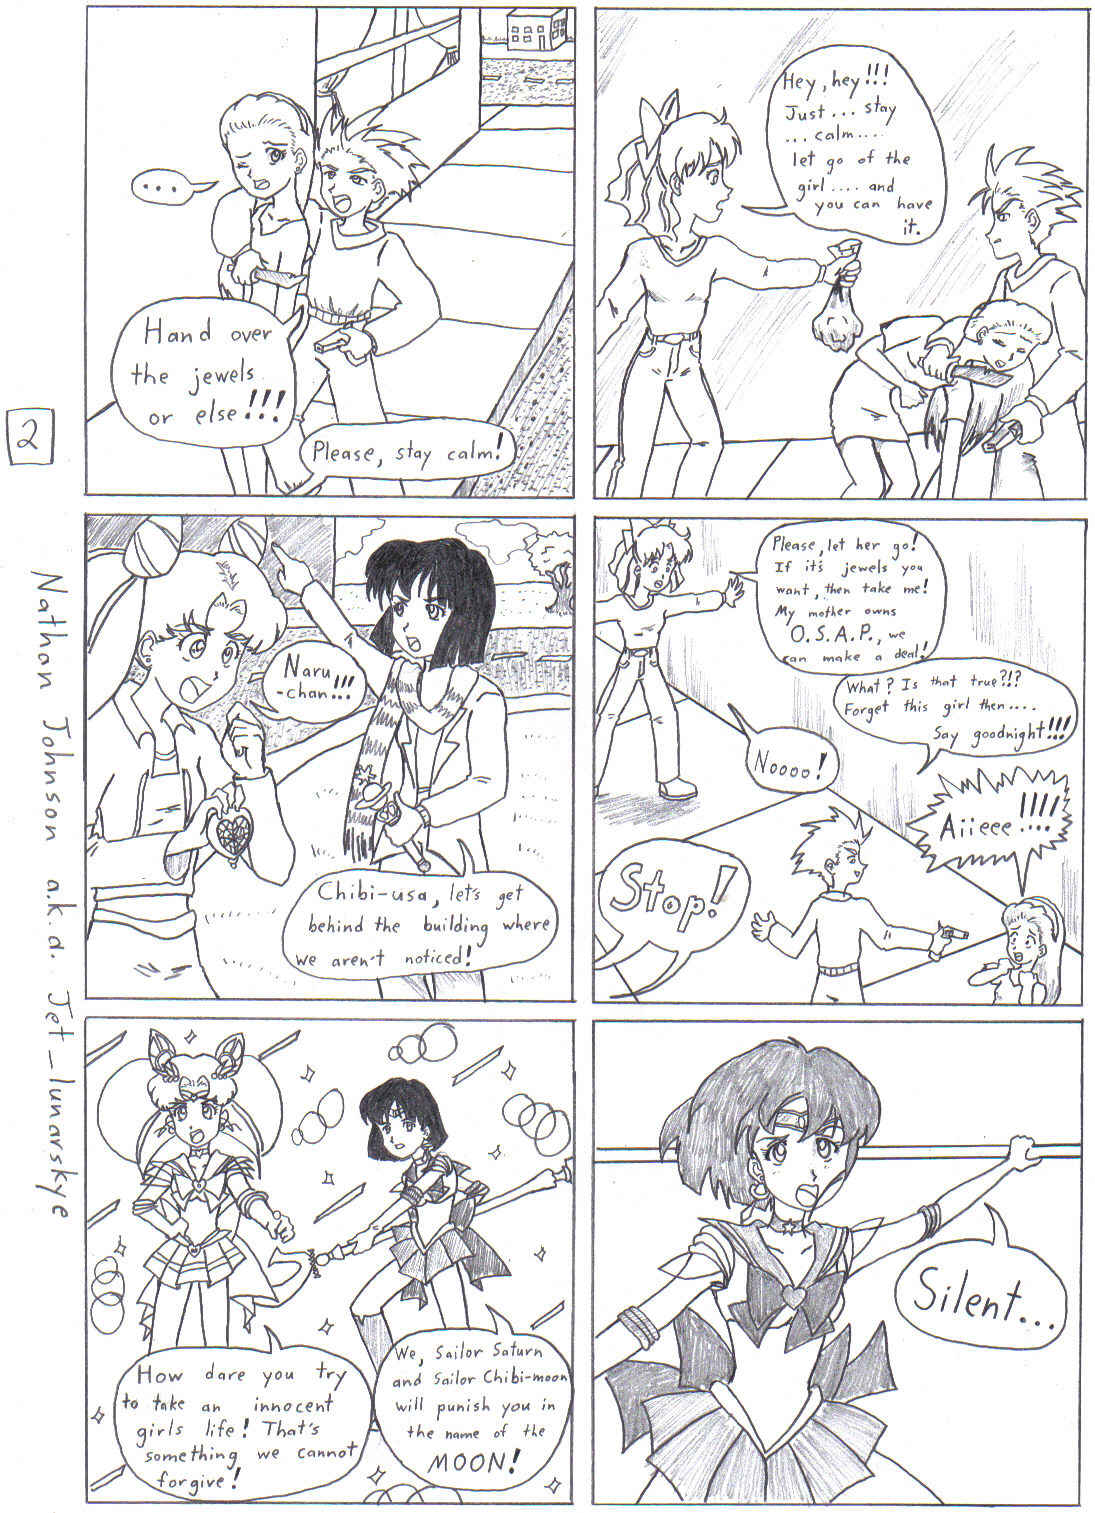 Sailor Moon Stars: The Nightmare Soldier page 2 by Jet_lunarskye